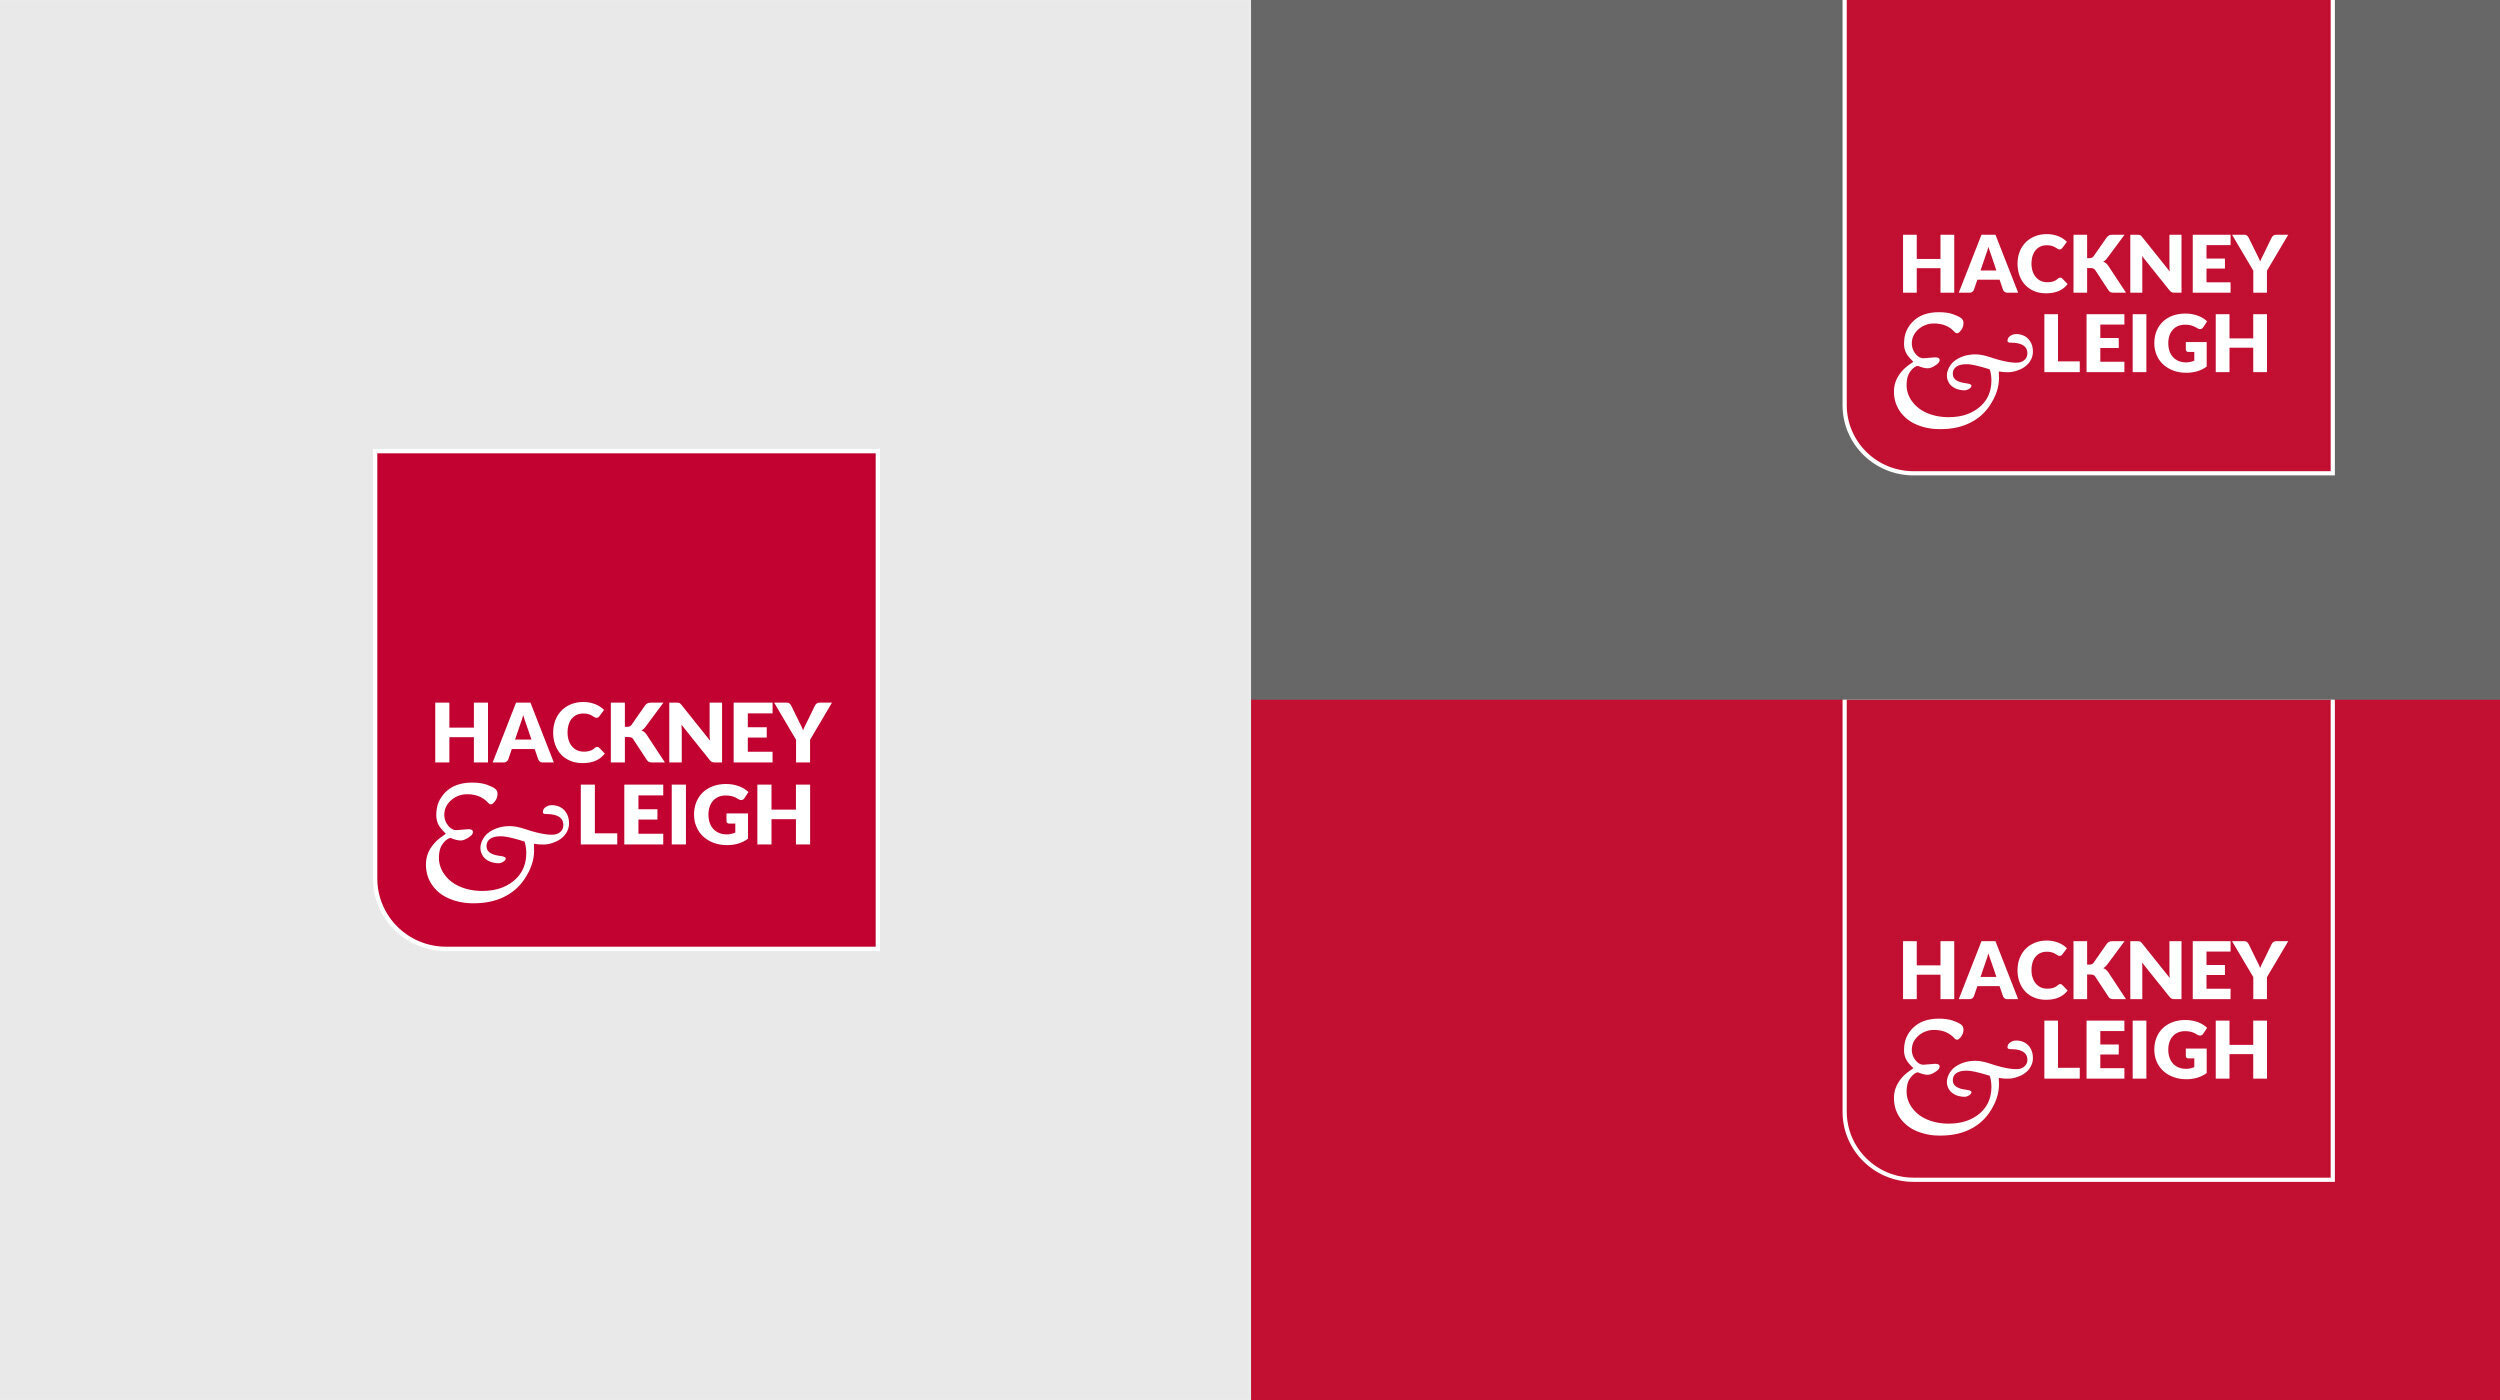 brand-strategy-design-hackney-and-leigh-the-brand-chap-8.jpeg